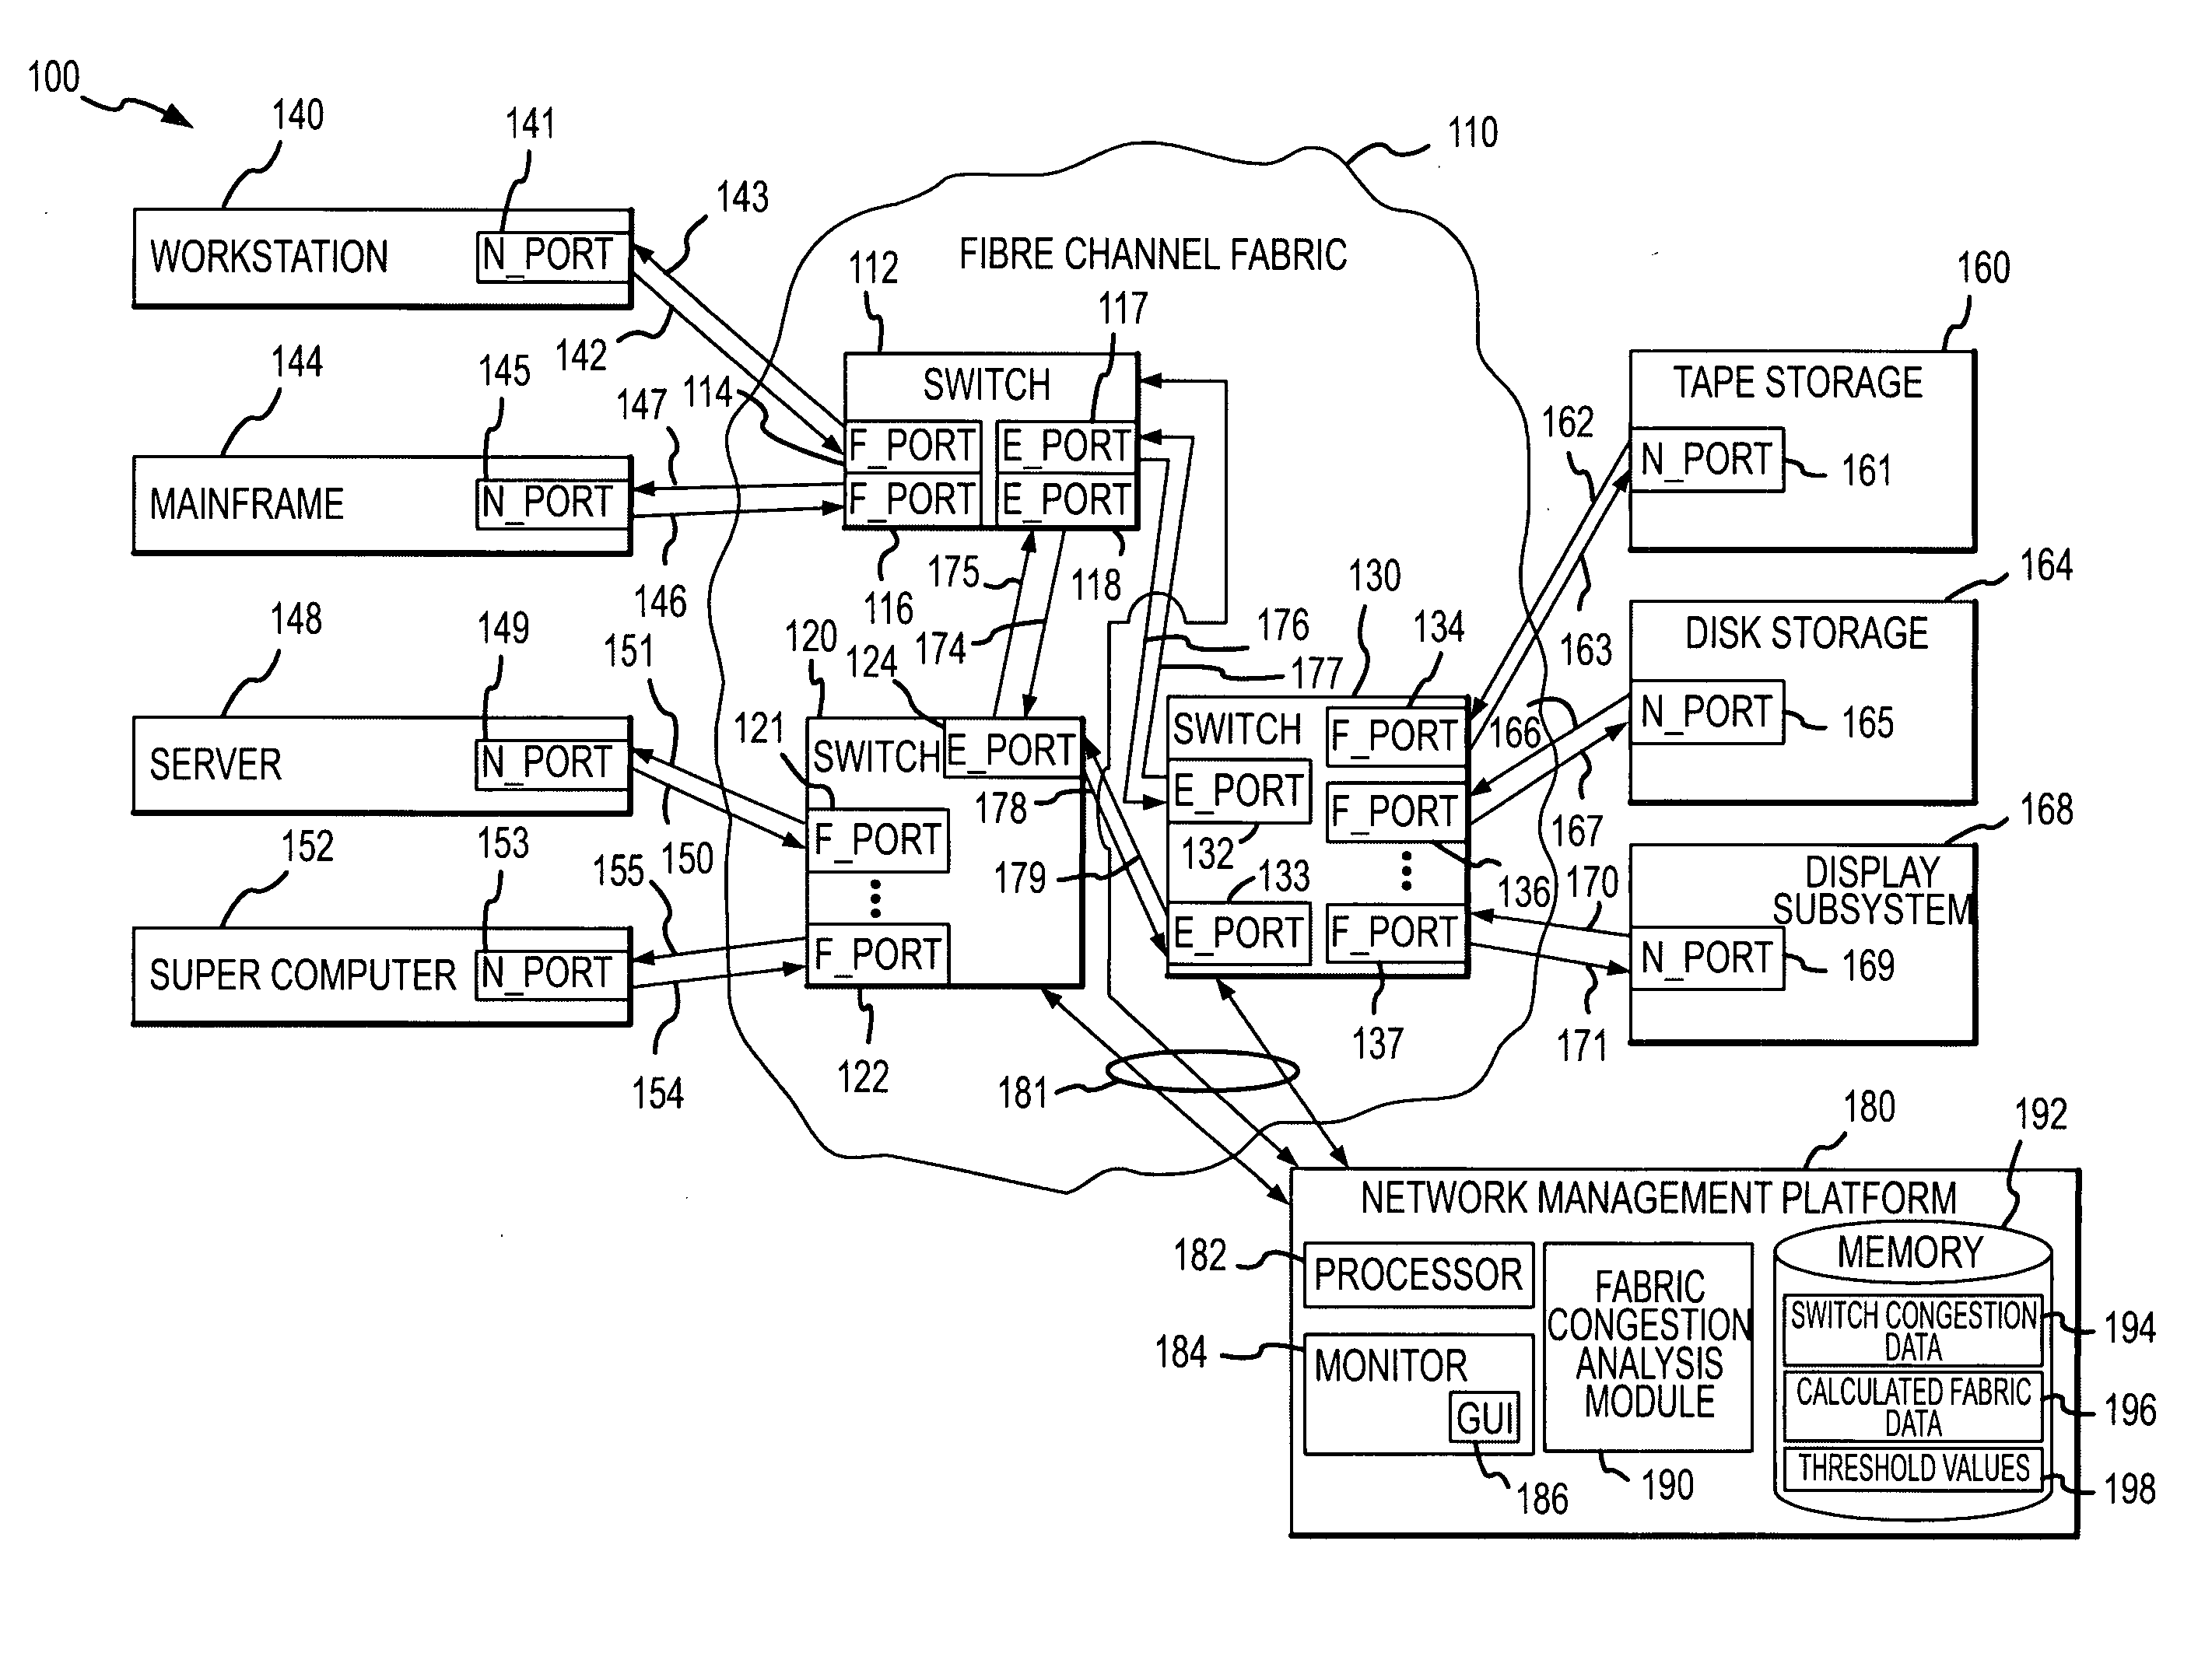 Method of detecting and monitoring fabric congestion